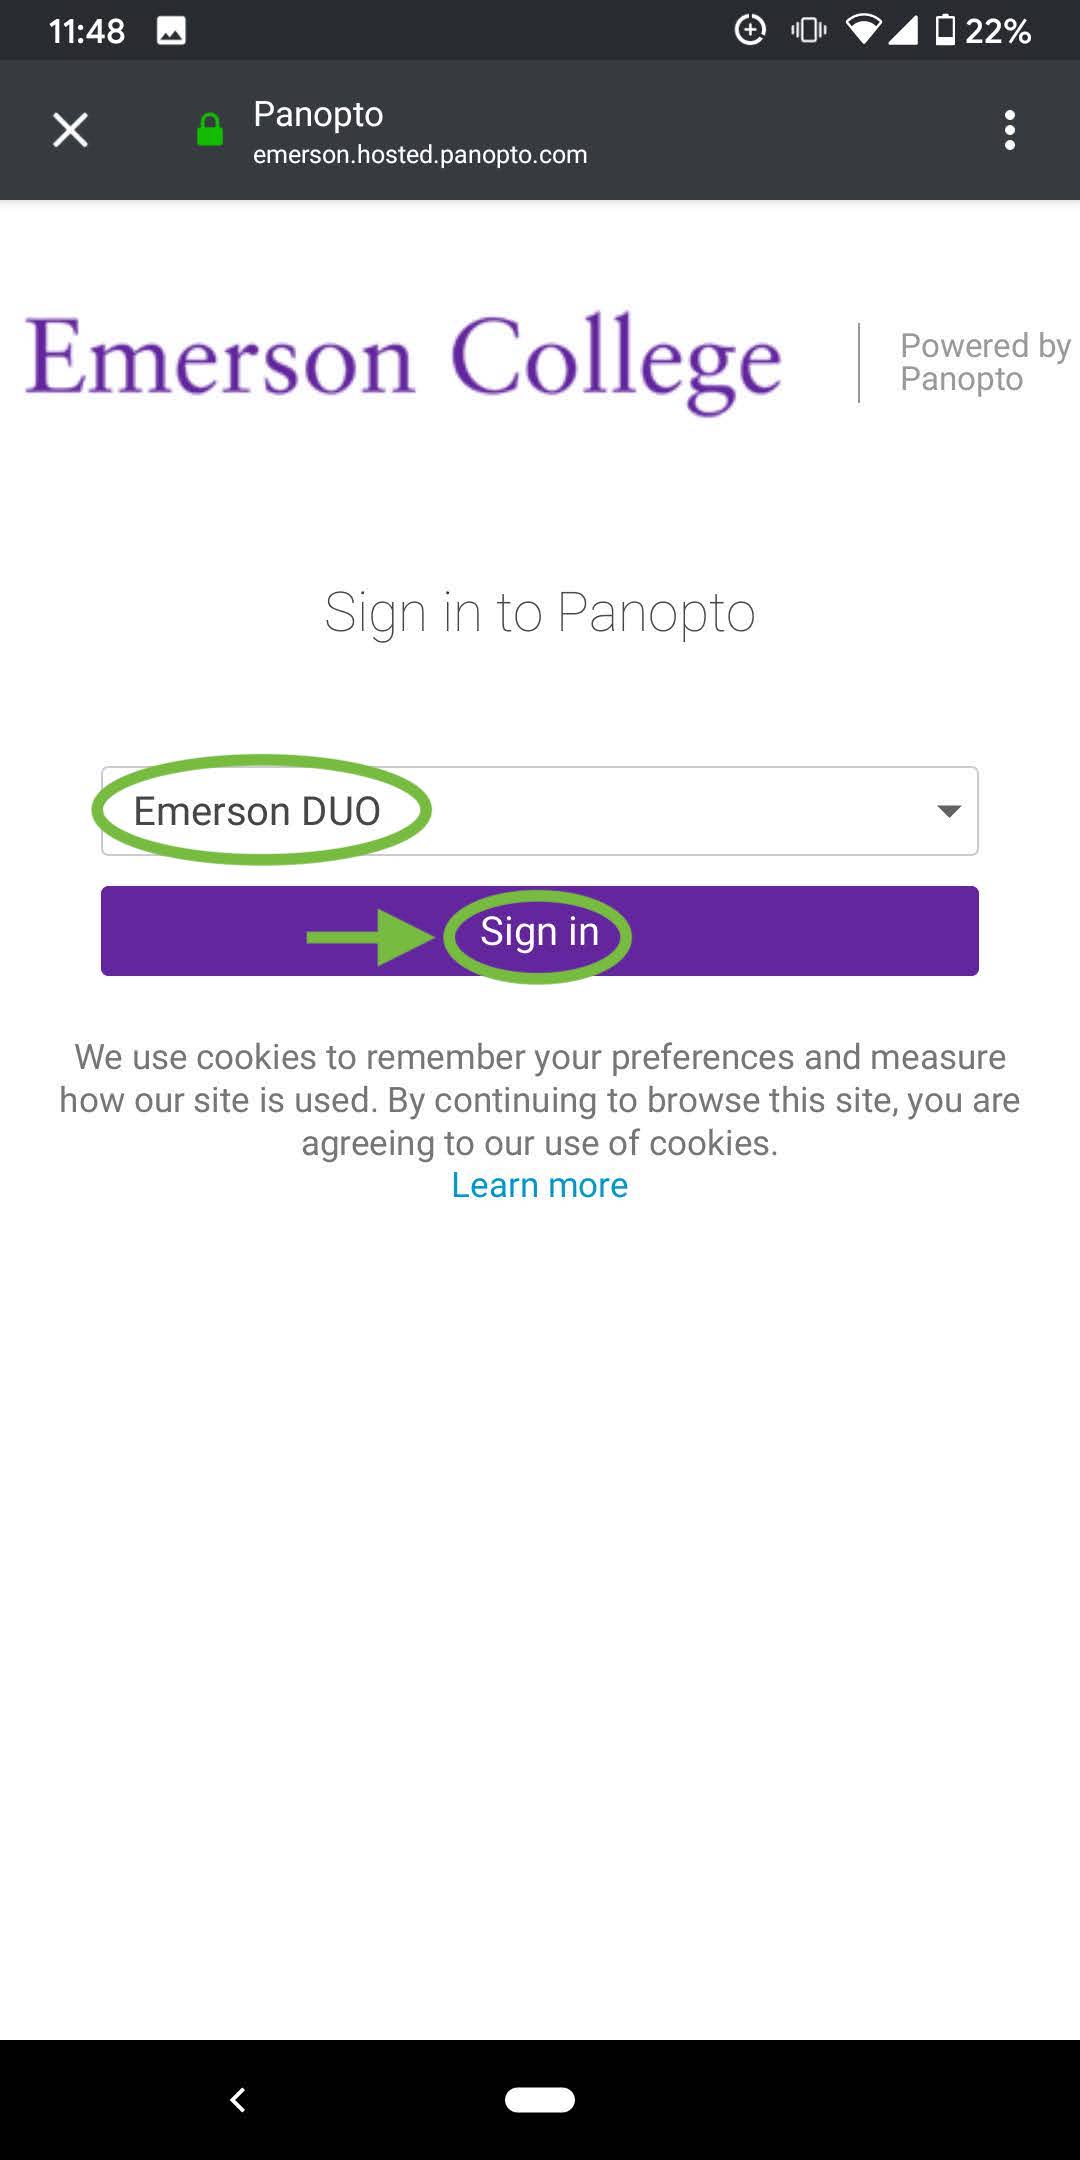 The second screen of the Panopto app's sign-in process, with Emerson DUO displayed in a central dropdown menu and the Sign In button below it indicated.